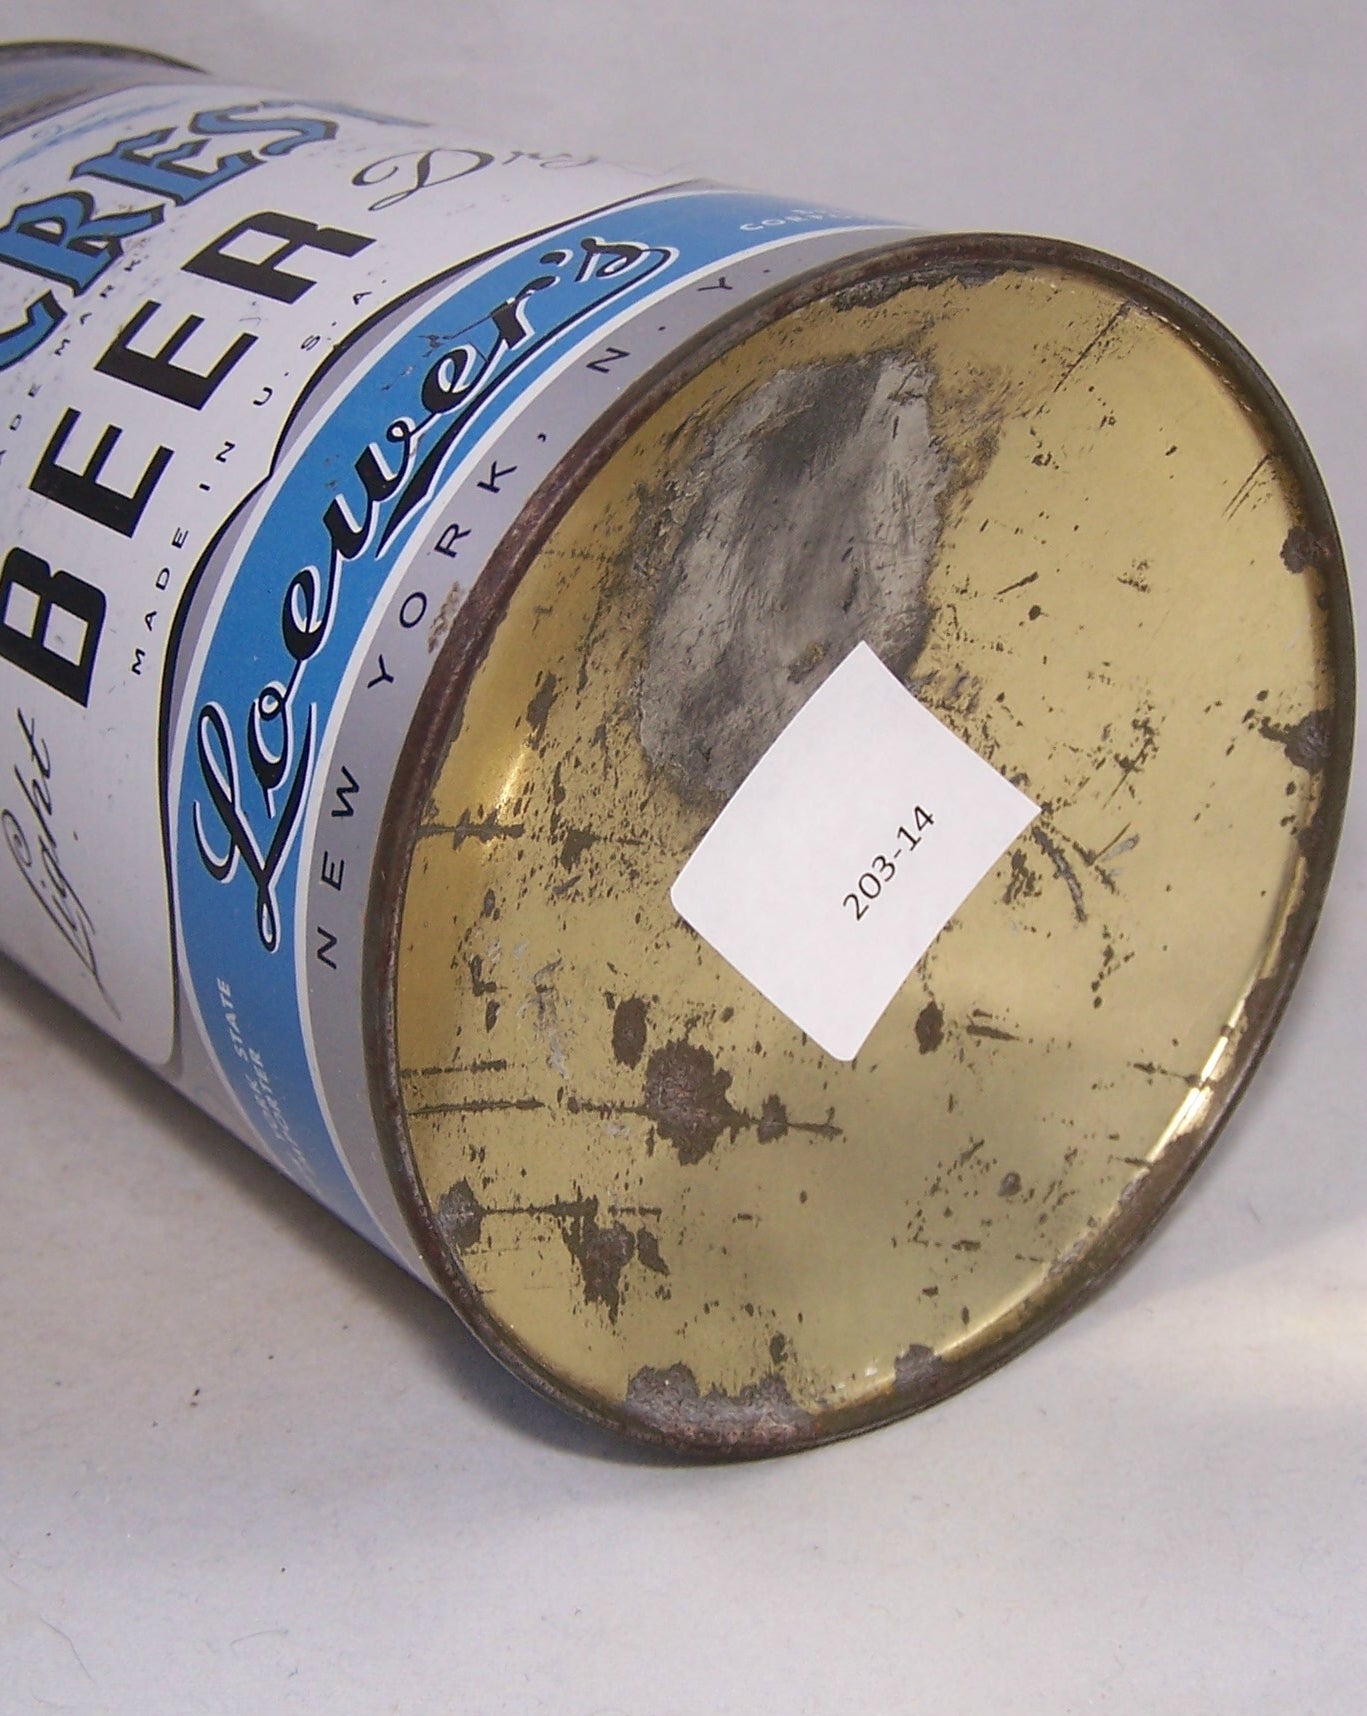 Blue Crest Beer, USBC 203-14, Grade 1/1+ Rolled Can Sold on 01/30/18